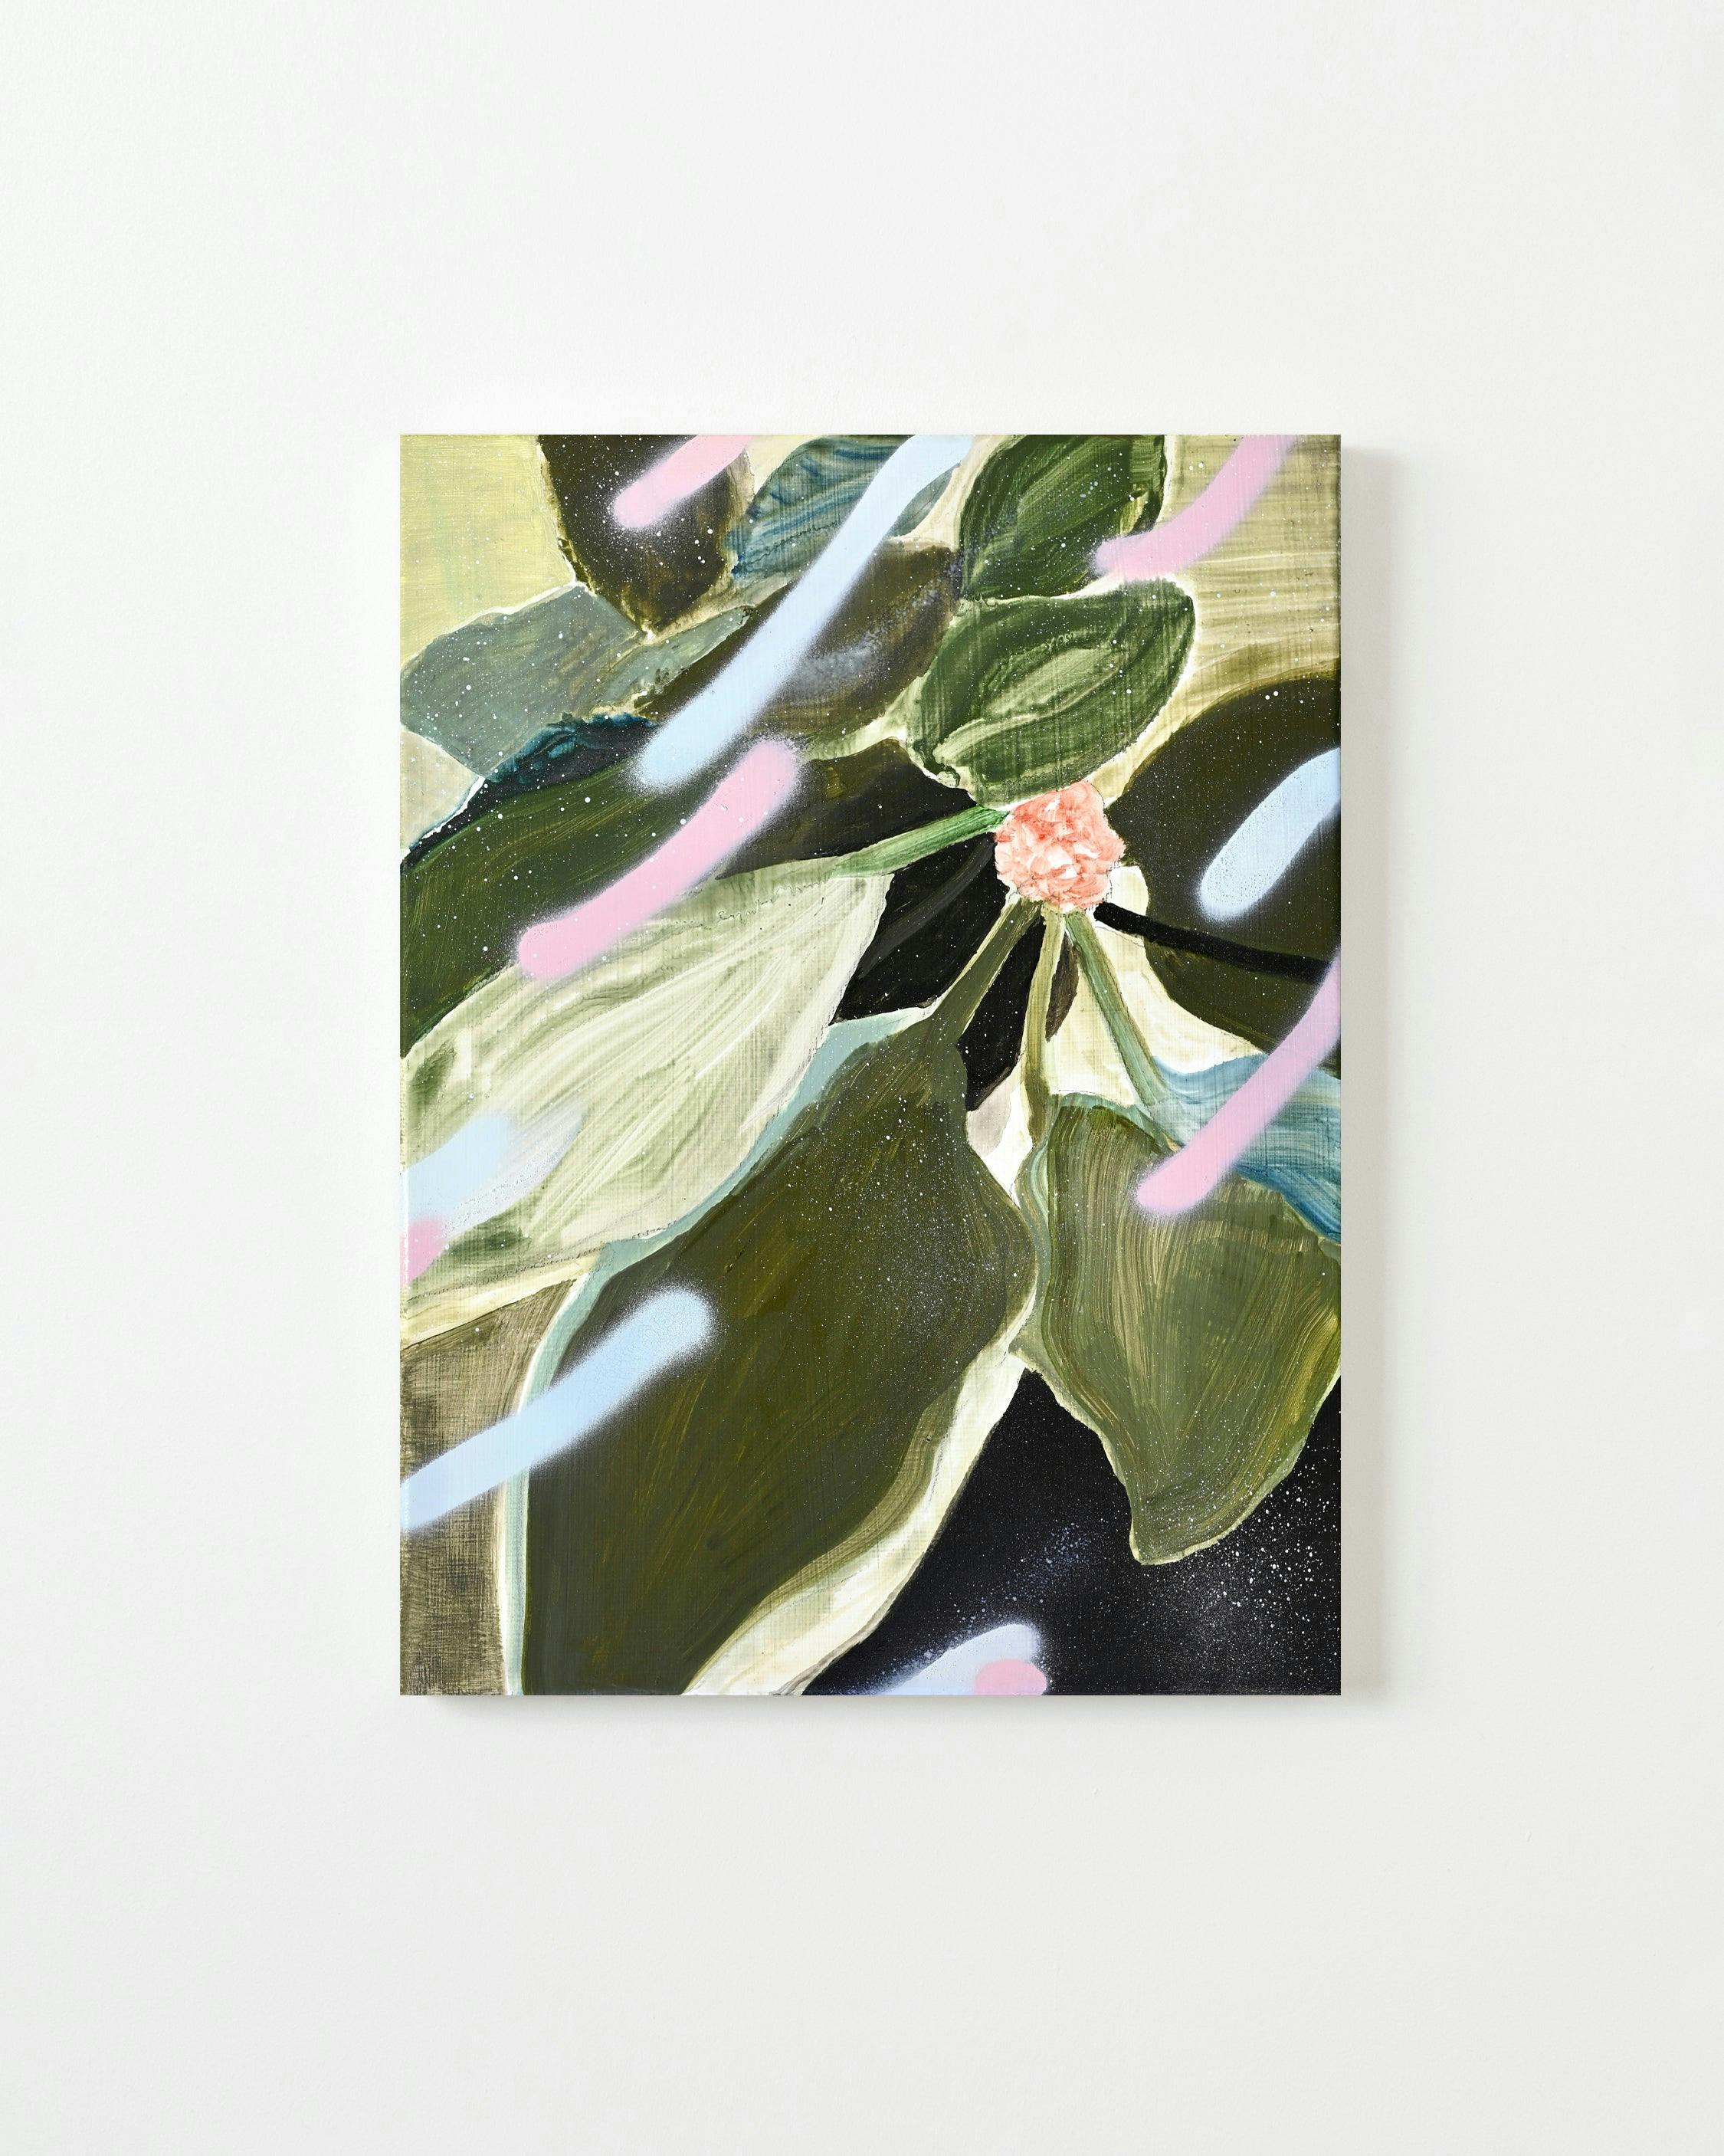 Painting by Una Ursprung titled "Morning dew, flowering plant #14".